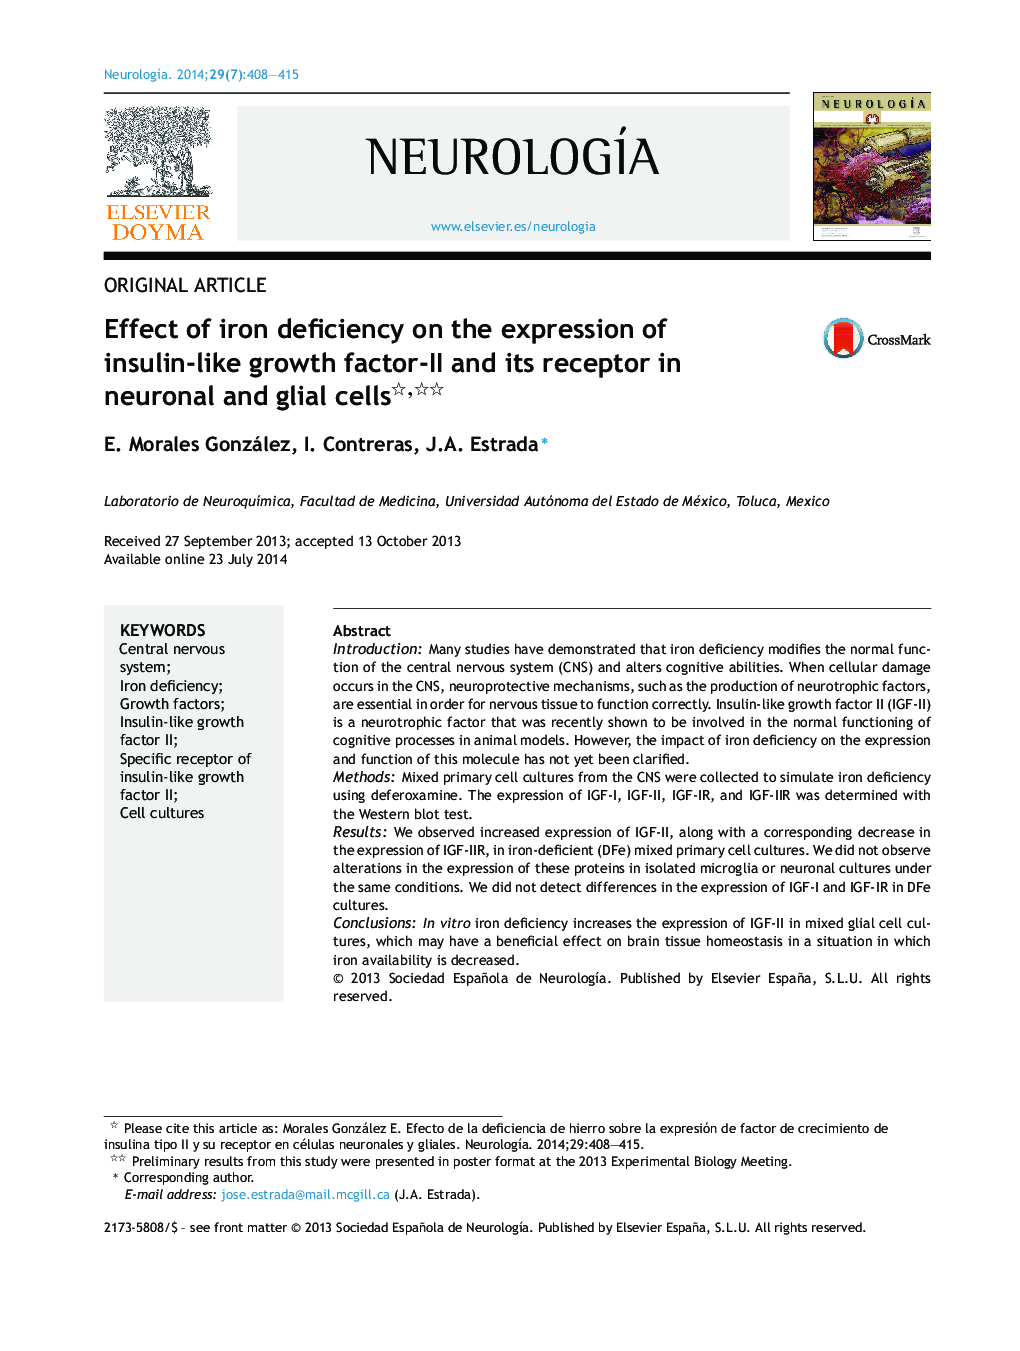 Effect of iron deficiency on the expression of insulin-like growth factor-II and its receptor in neuronal and glial cells 